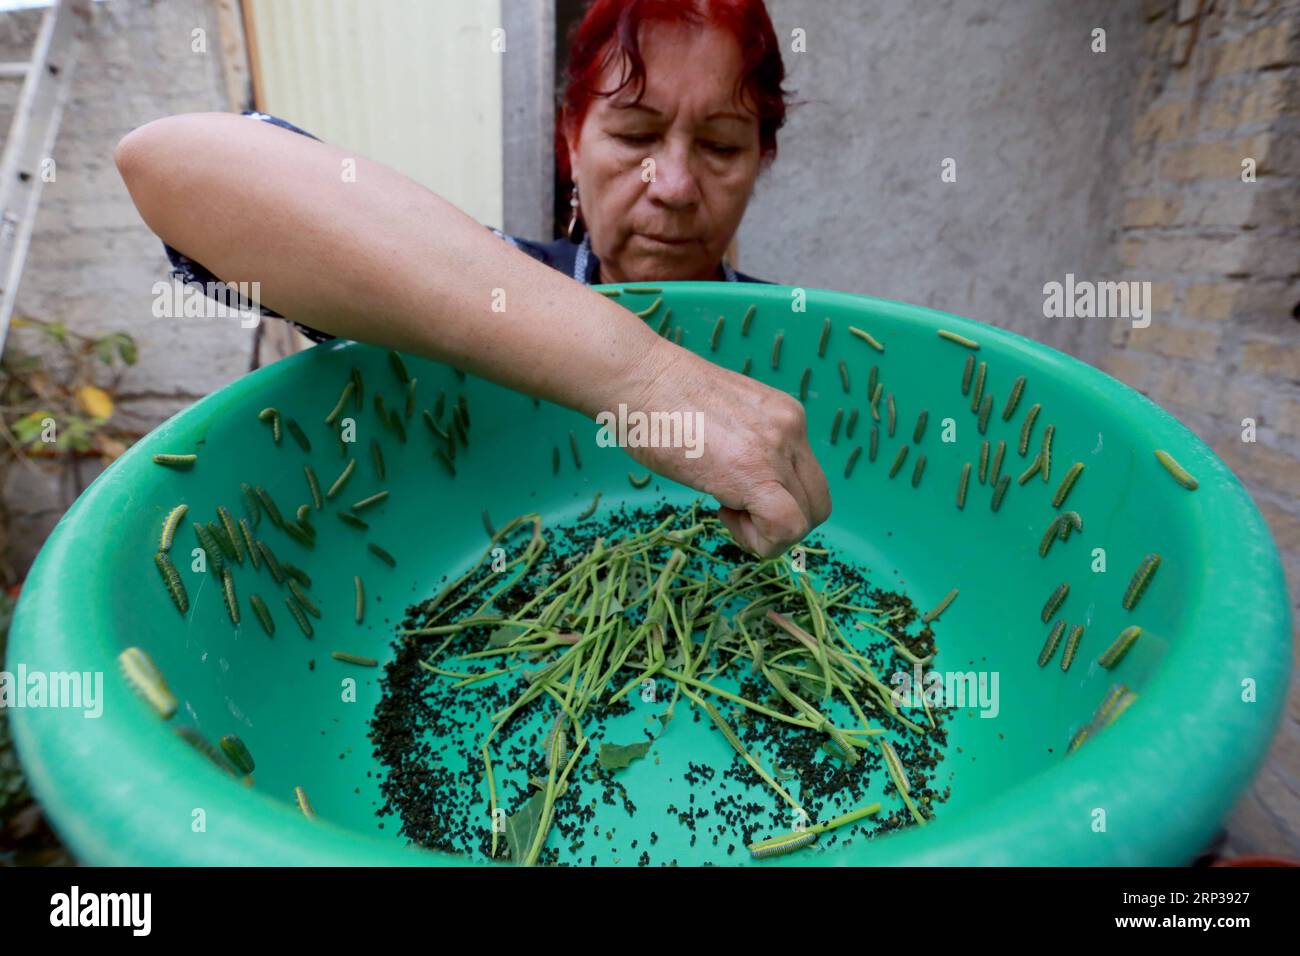 (180926) -- MEXICO CITY, Sept. 26, 2018 -- Patricia Hernandez, a butterfly breeder and manager of the captive butterfly hatchery Arthropoda , feed worms in the captive butterfly hatchery in the town of Xochitepec in Mexico City, capital of Mexico, on Sept. 24, 2018. The white butterfly hatchery was founded by the biologist Javier Olivares and has started this project more than 15 years ago. ) (yy) MEXICO-MEXICO CITY-BUTTERFLY HATCHERY LUISxCASTILLO PUBLICATIONxNOTxINxCHN Stock Photo